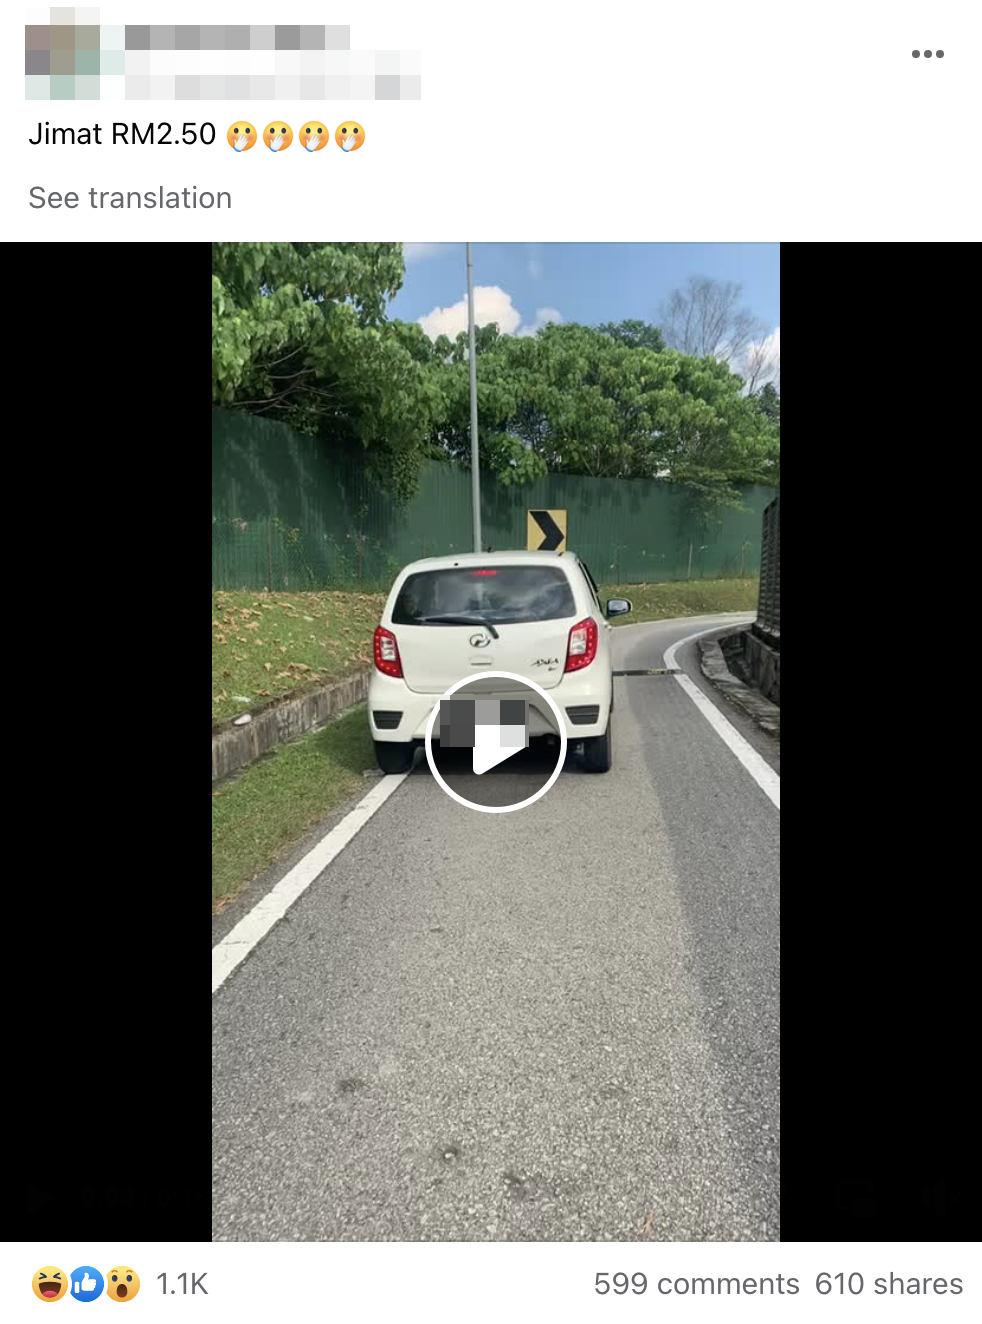 Axia driver uses motorcycle lane to save rm2. 50 toll fee, gets fined rm300 in return | weirdkaya